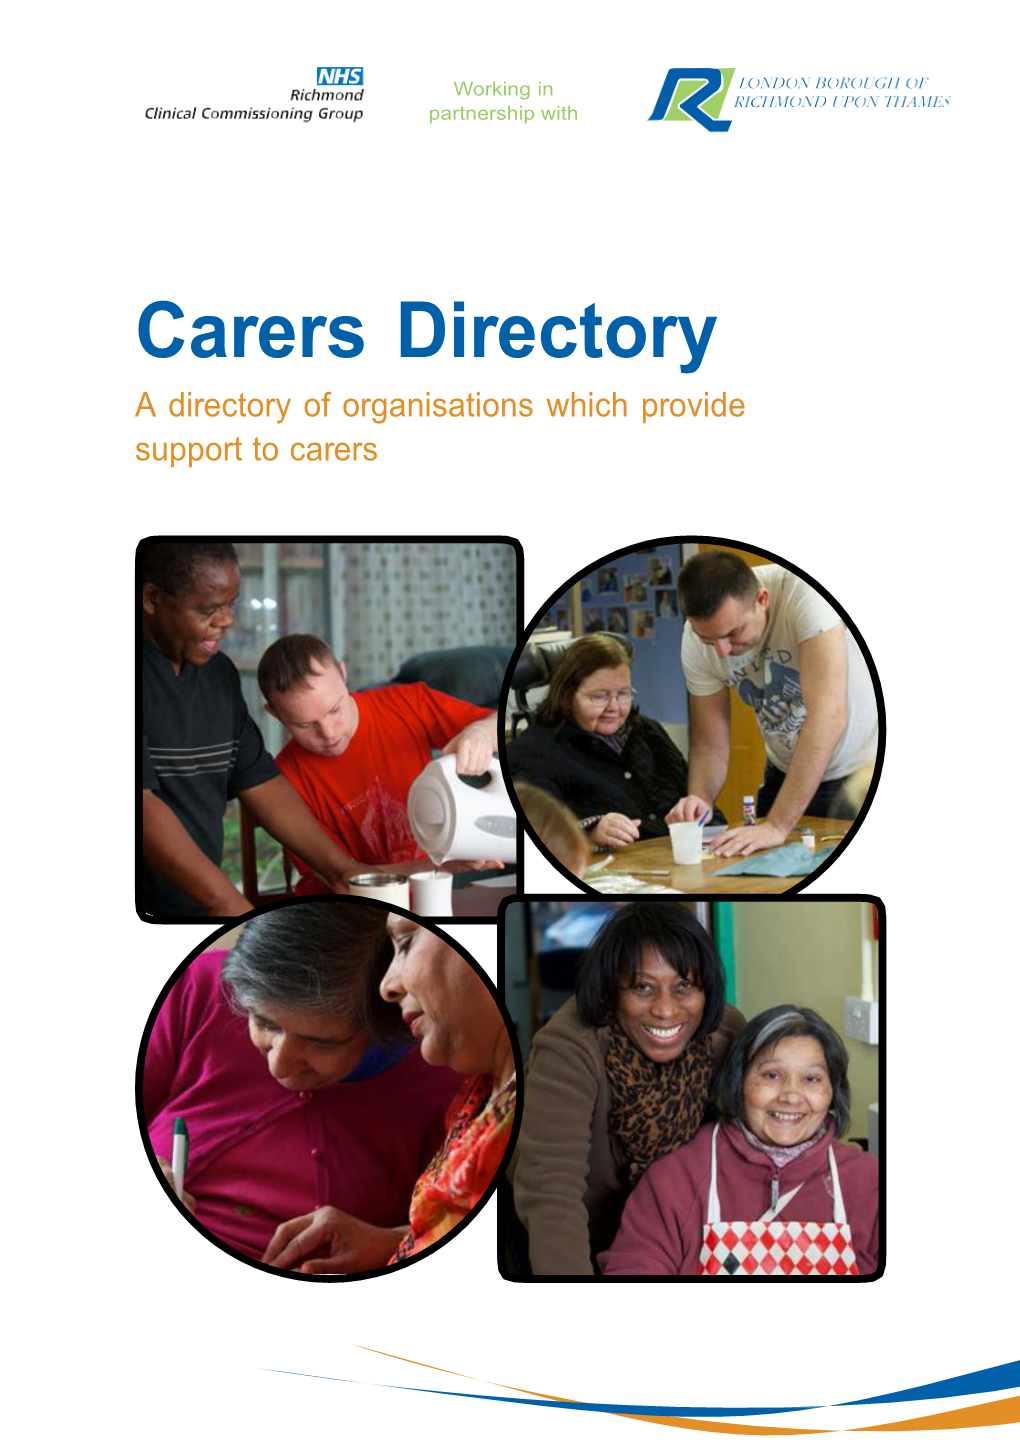 Carers Directory a Directory of Organisations Which Provide Support to Carers